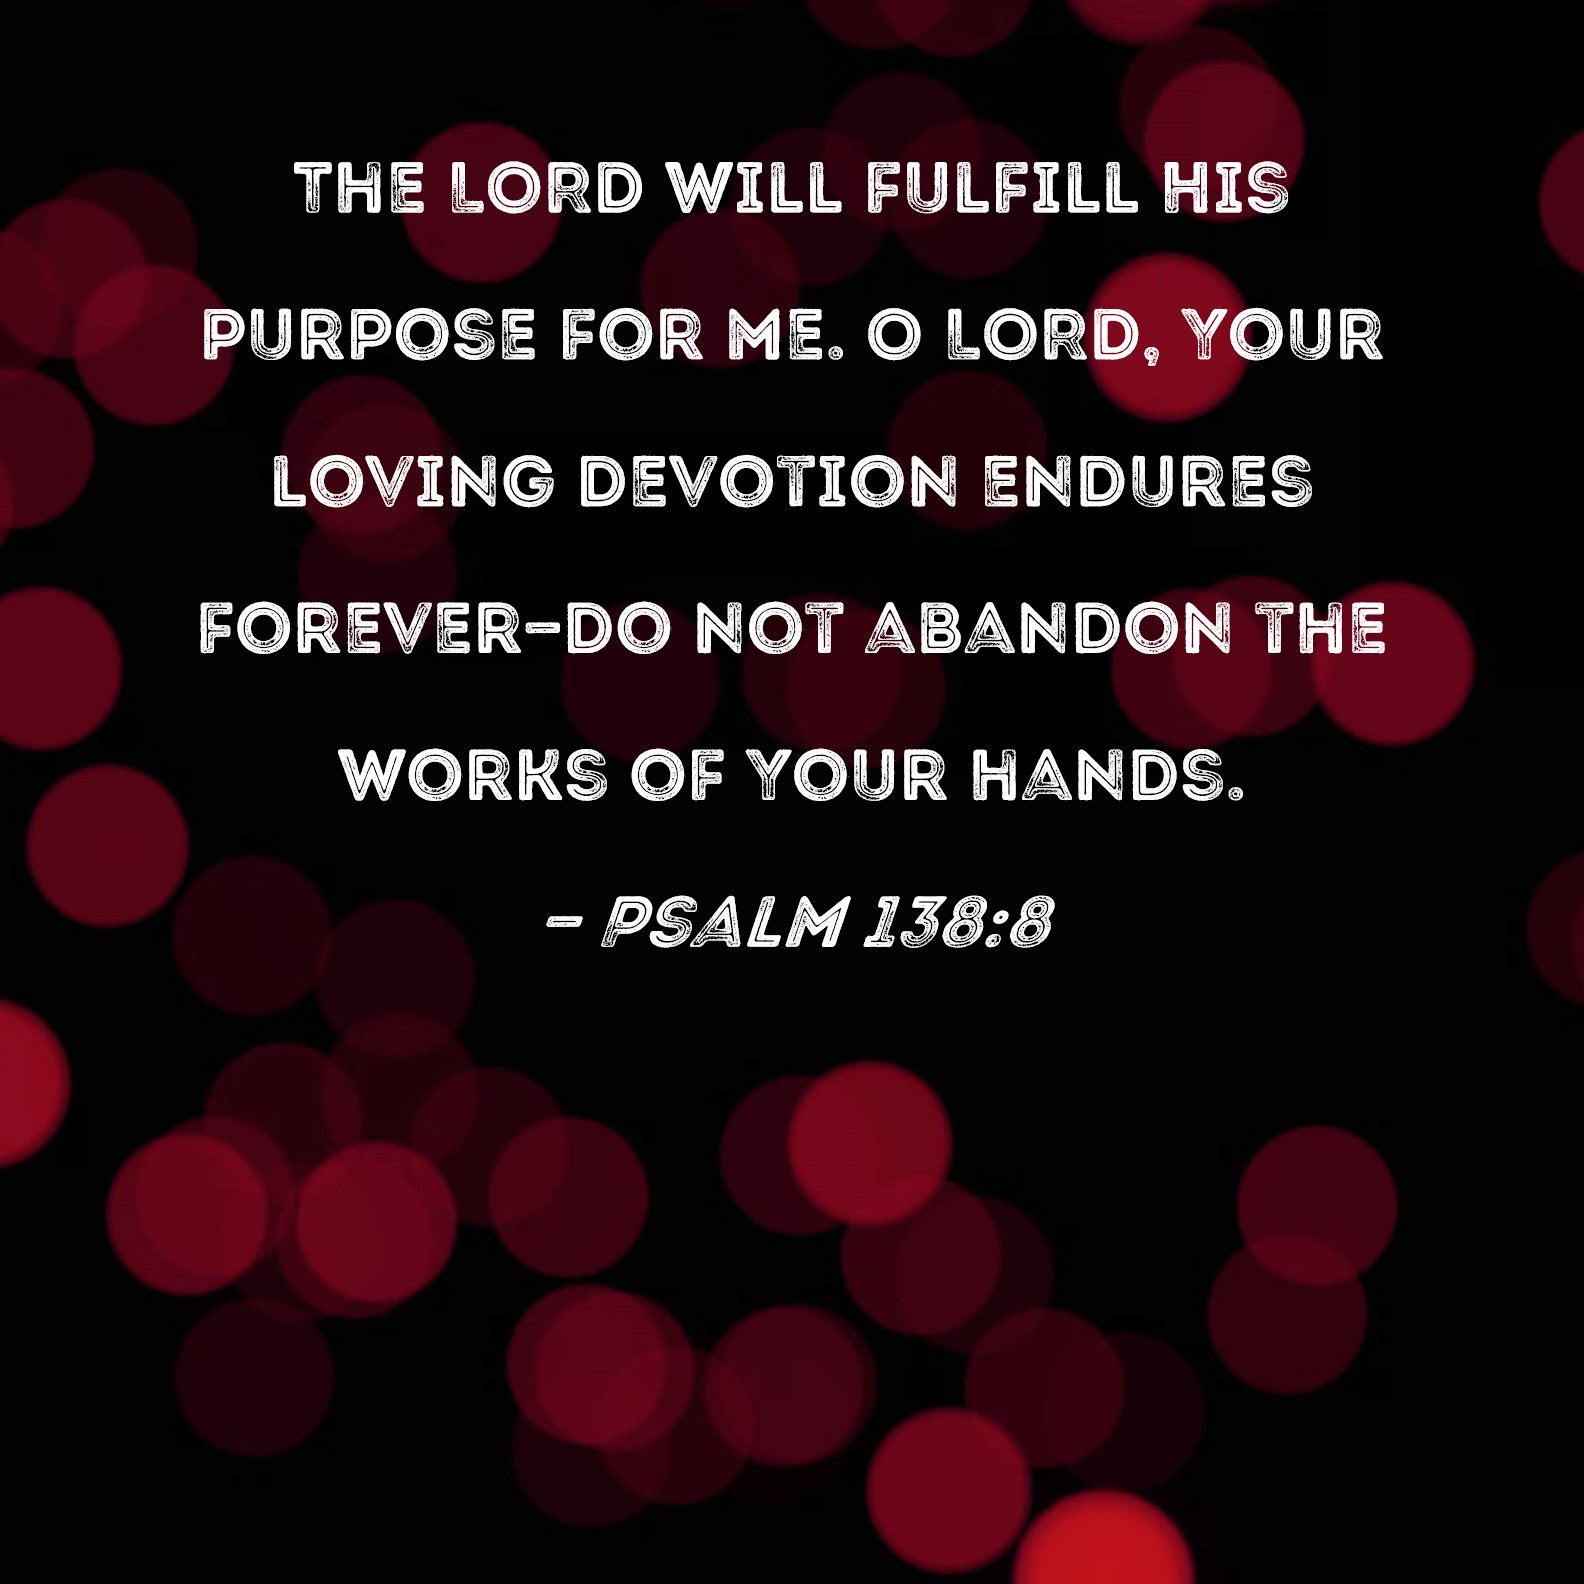 psalm-138-8-the-lord-will-fulfill-his-purpose-for-me-o-lord-your